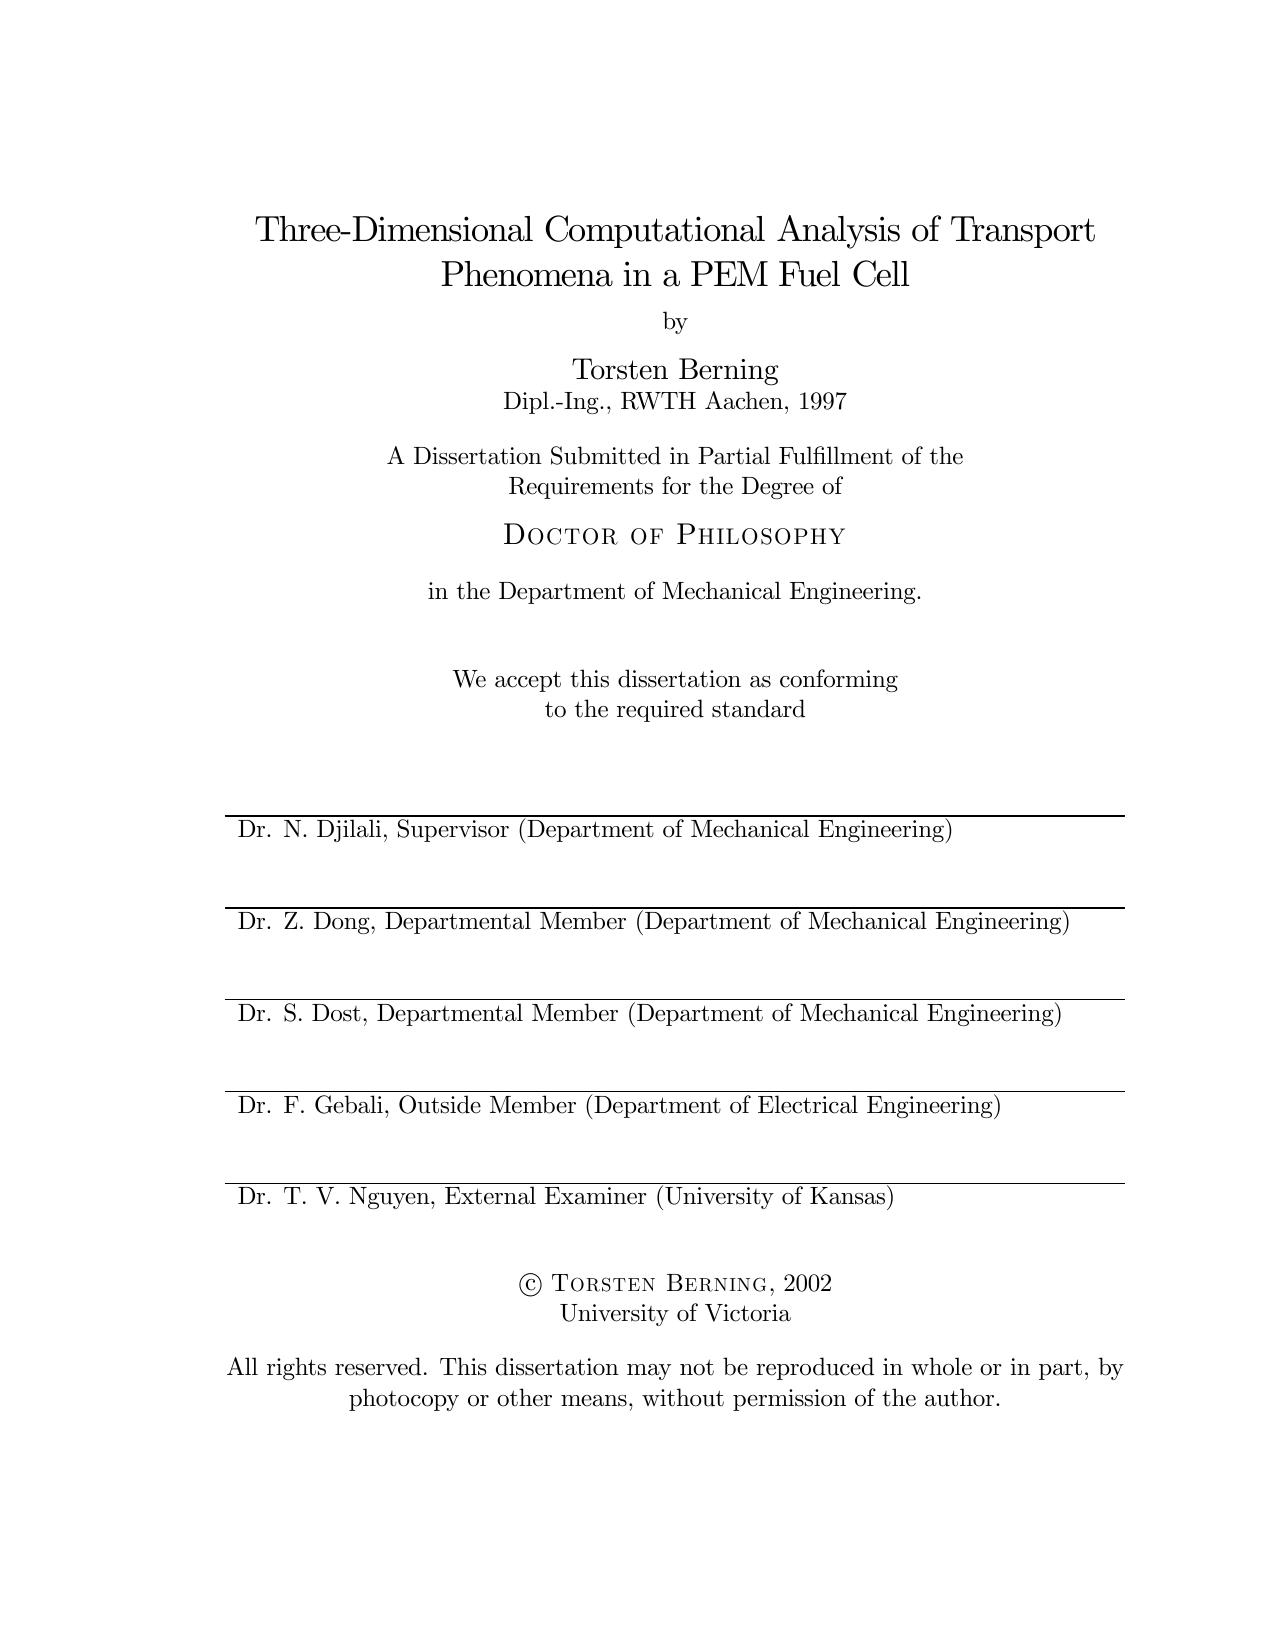 Three-Dimensional Computational Analysis of Transport  Phenomena in a PEM Fuel Cell - Thesis´